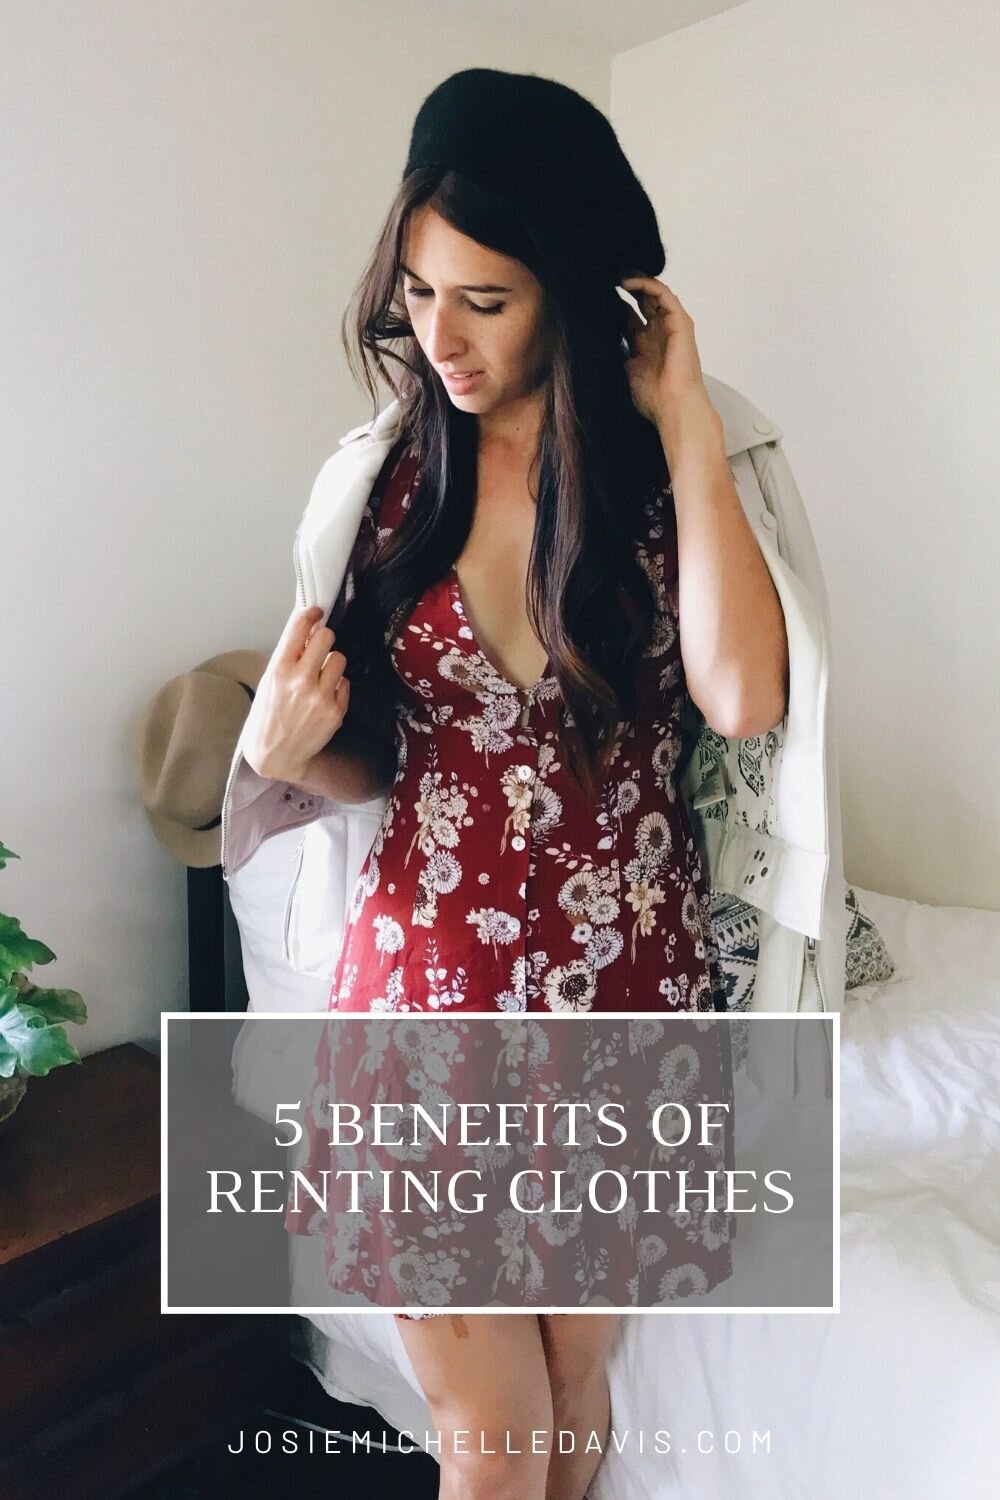 Guide to Renting Clothes